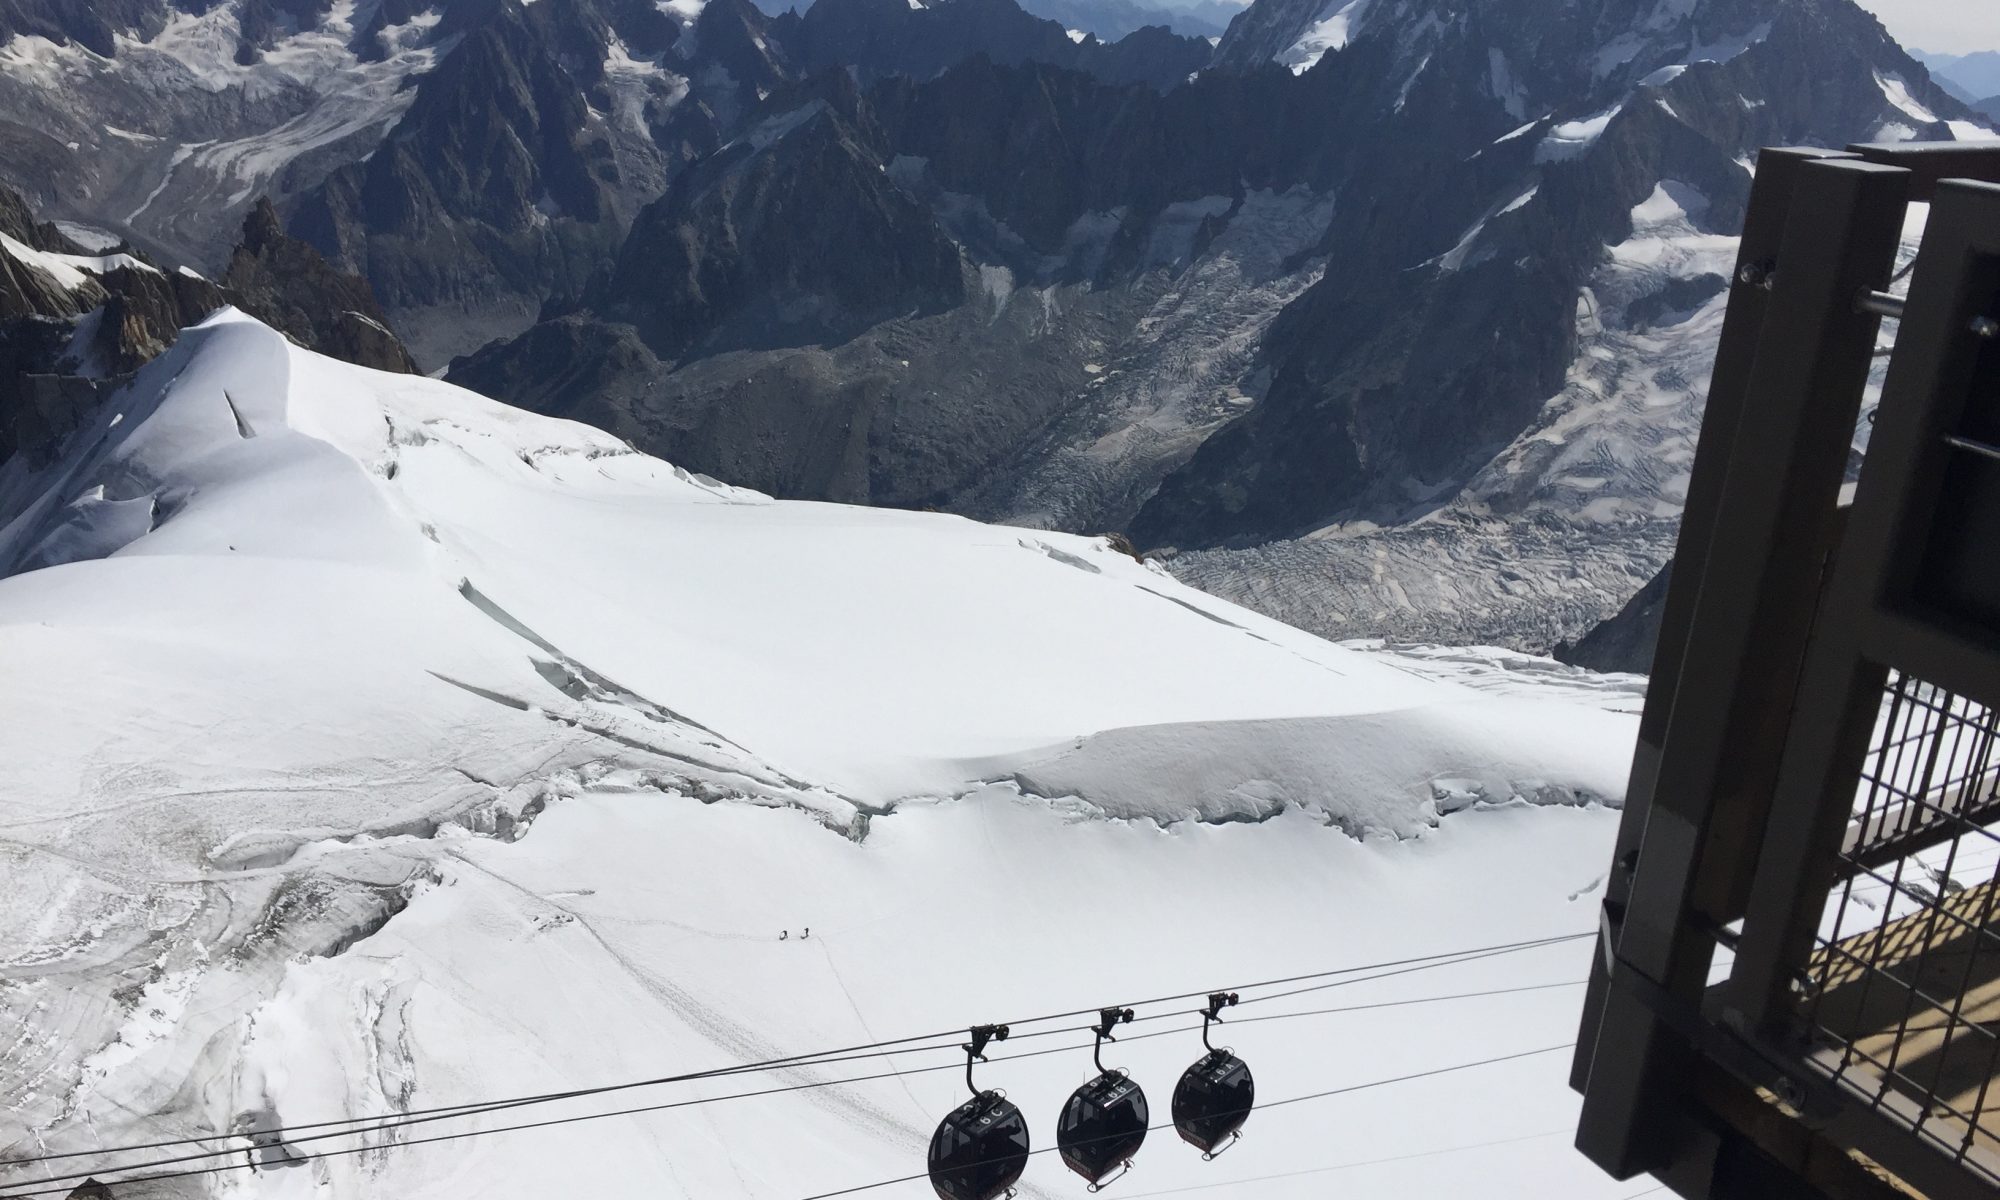 The Panoramic Mont Blanc gondola to re-open 15 June